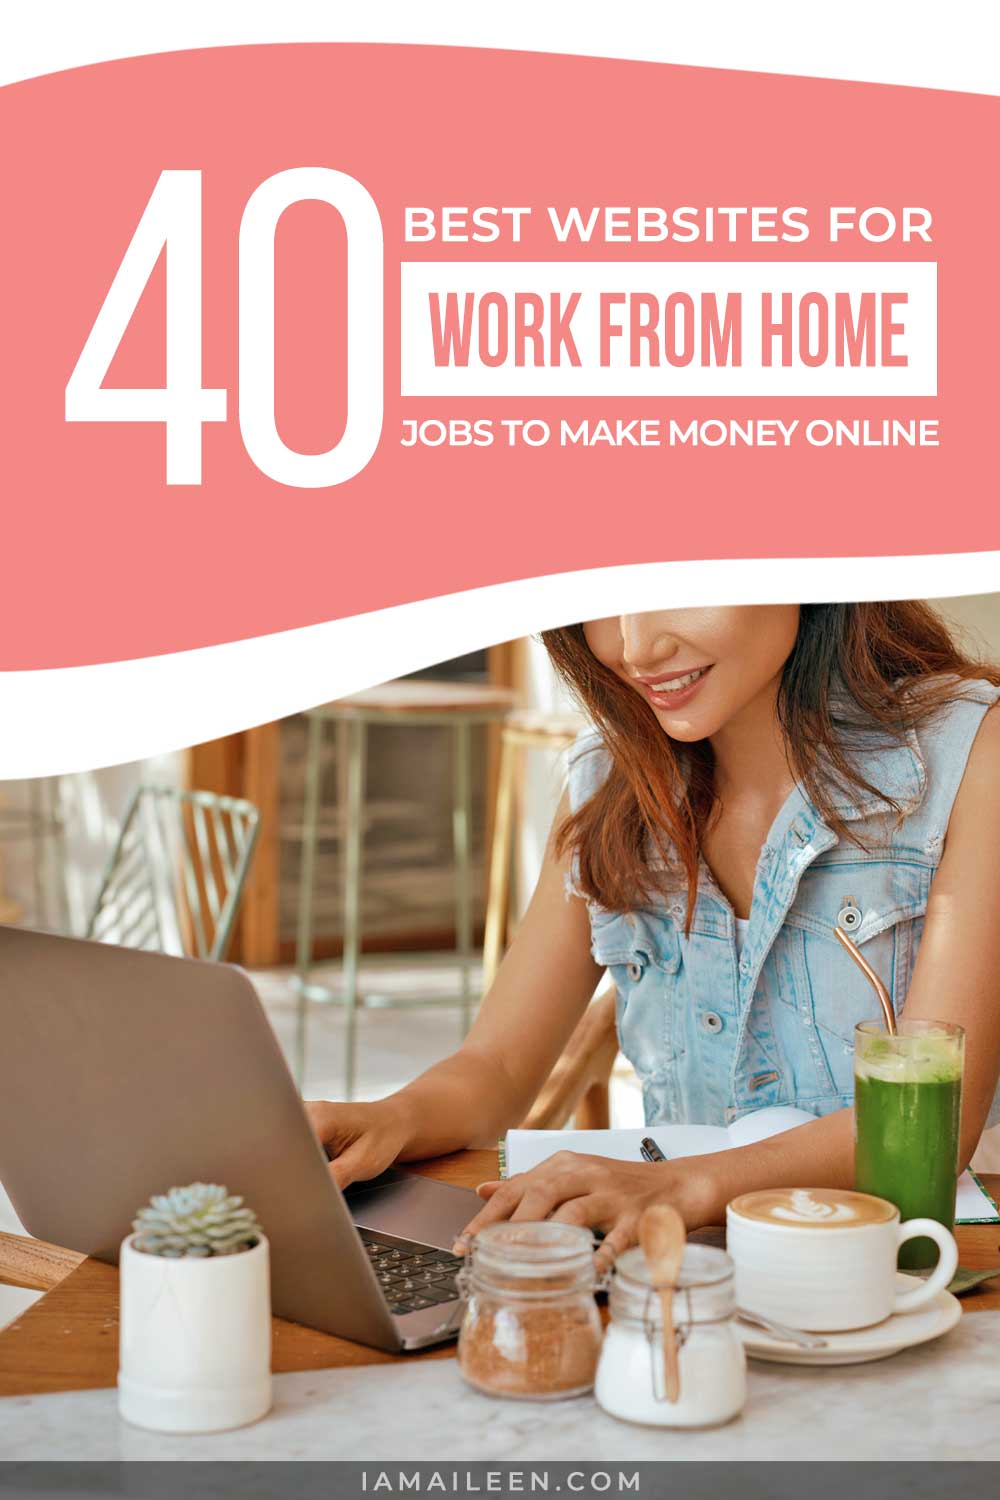 40 Best Websites for Work from Home Jobs to Make & Earn Money Online